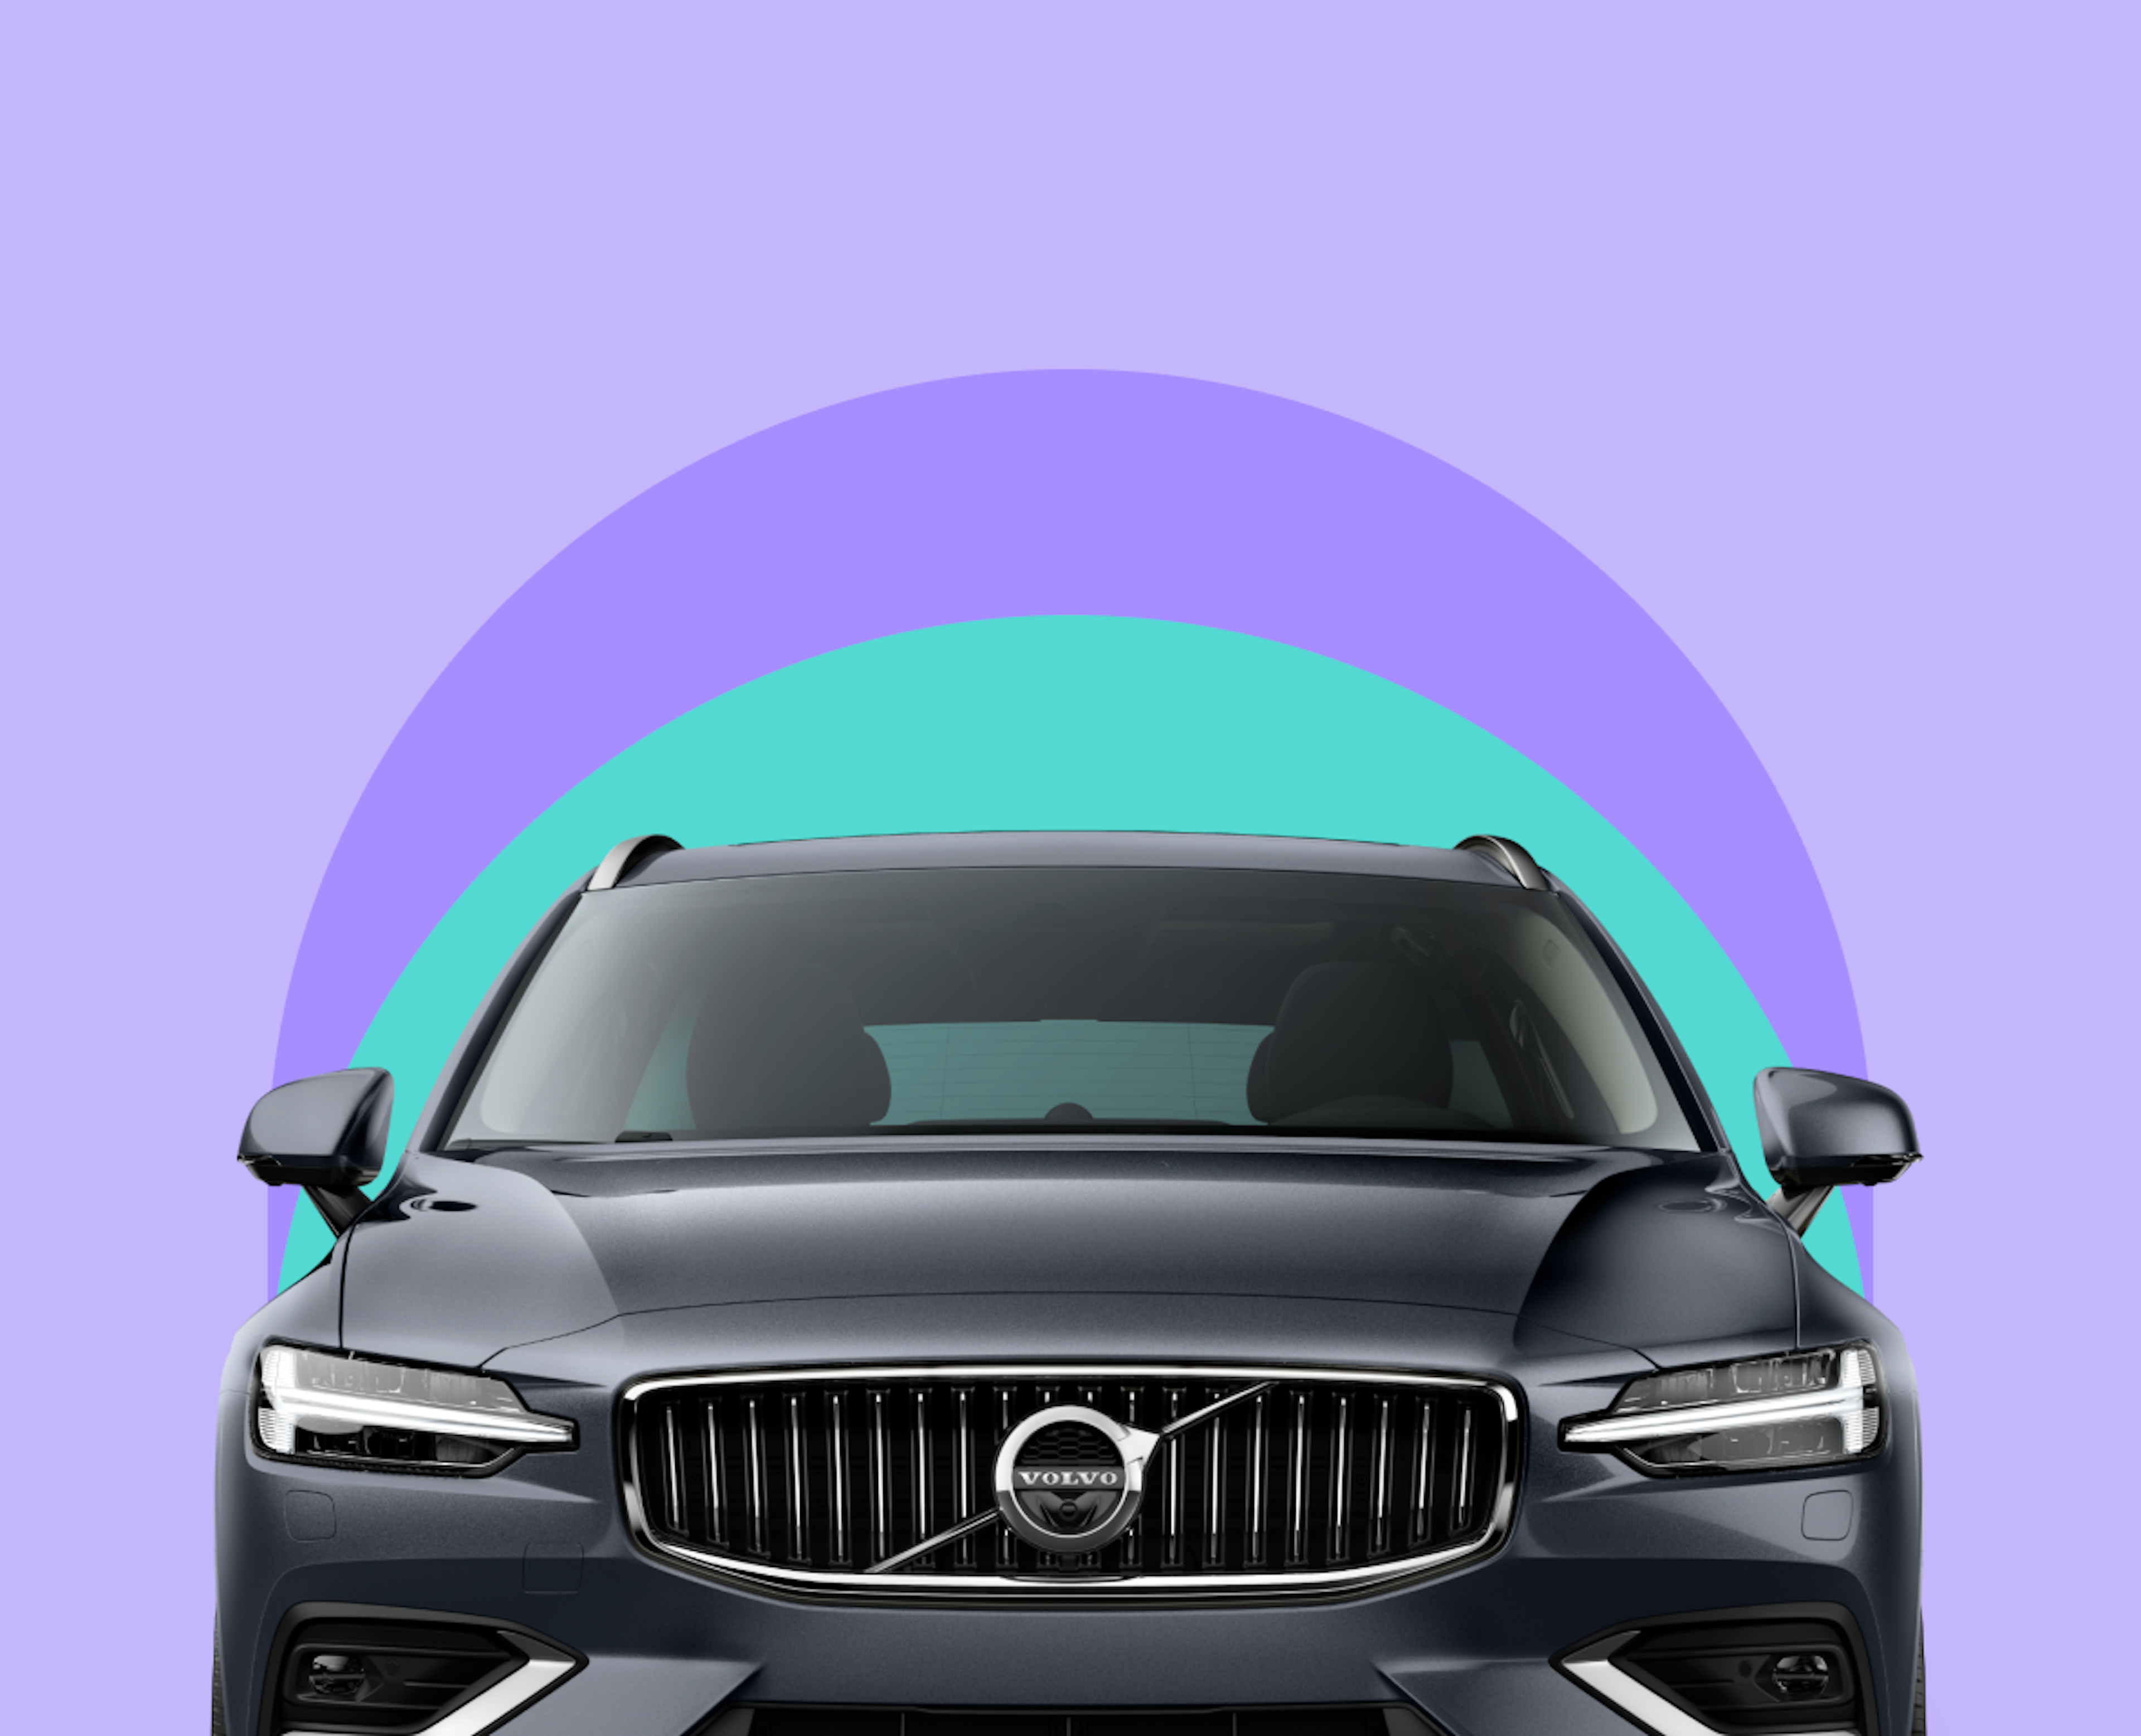 Front view of a Volvo car